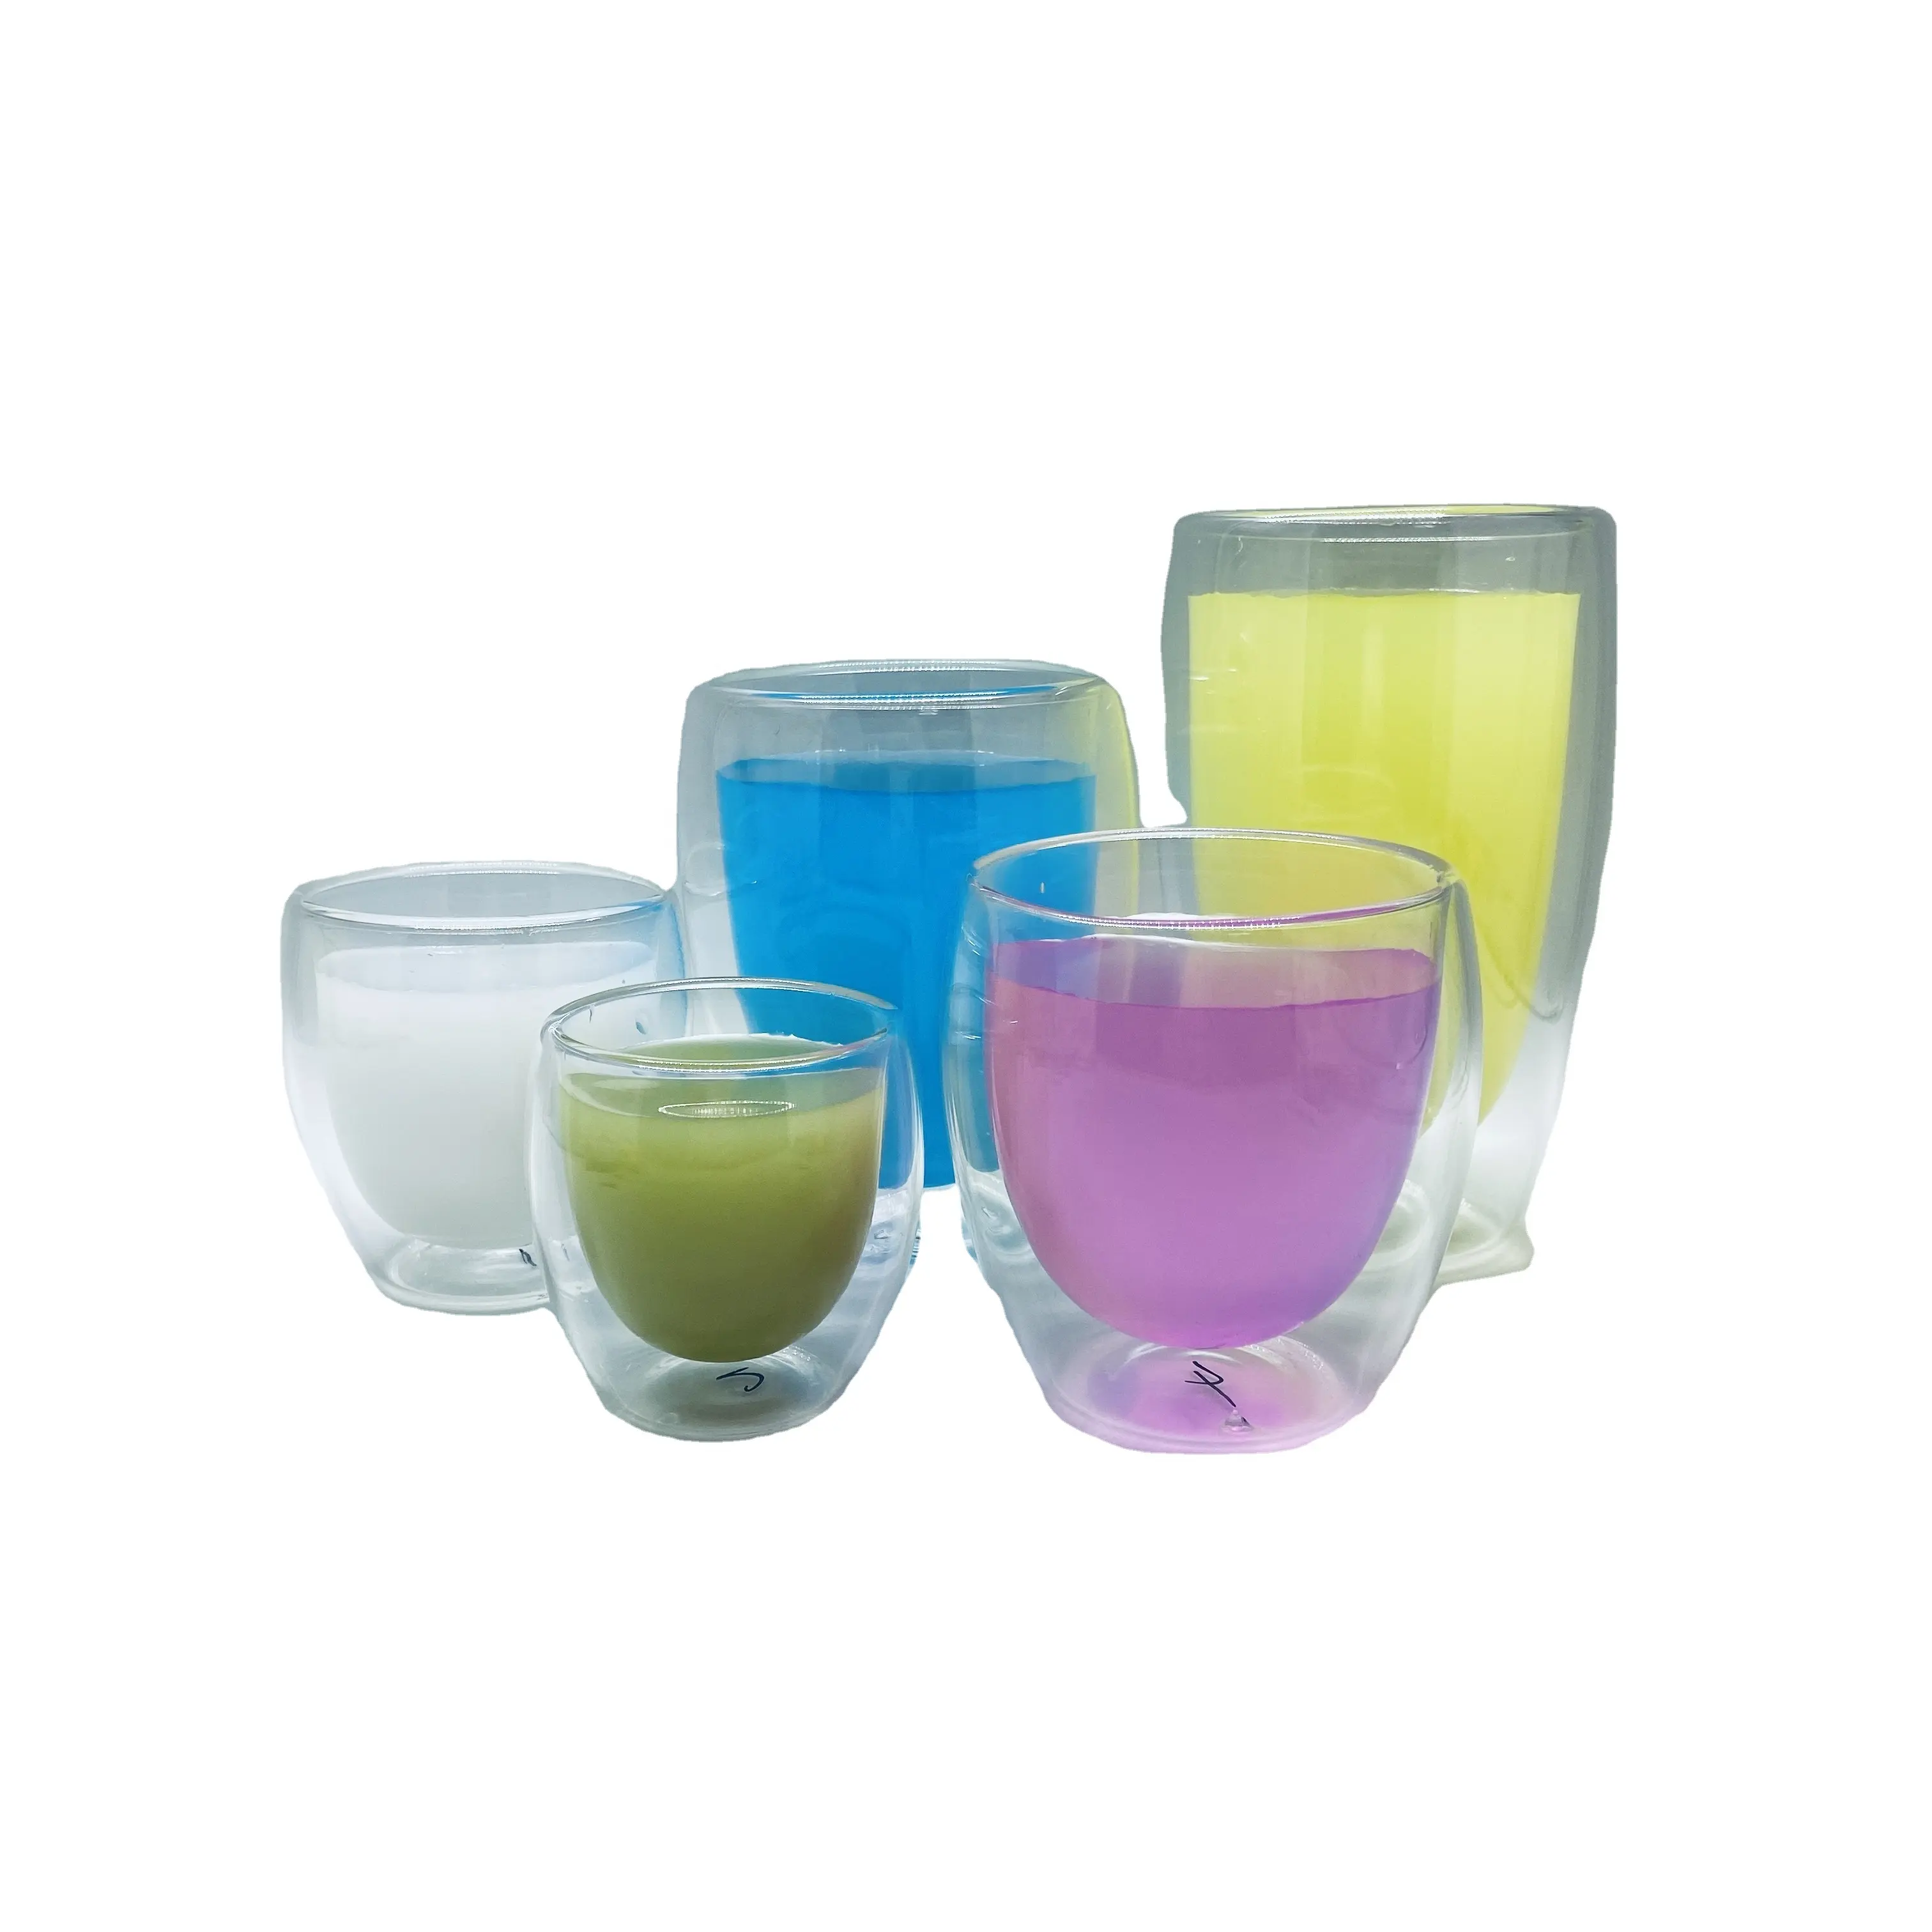 Double Wall Glass Beer Mugs Glassware Beverage Drinking Cups For Latte Espresso Coffee Tea Water Wine Juice Milk And Bar Dining